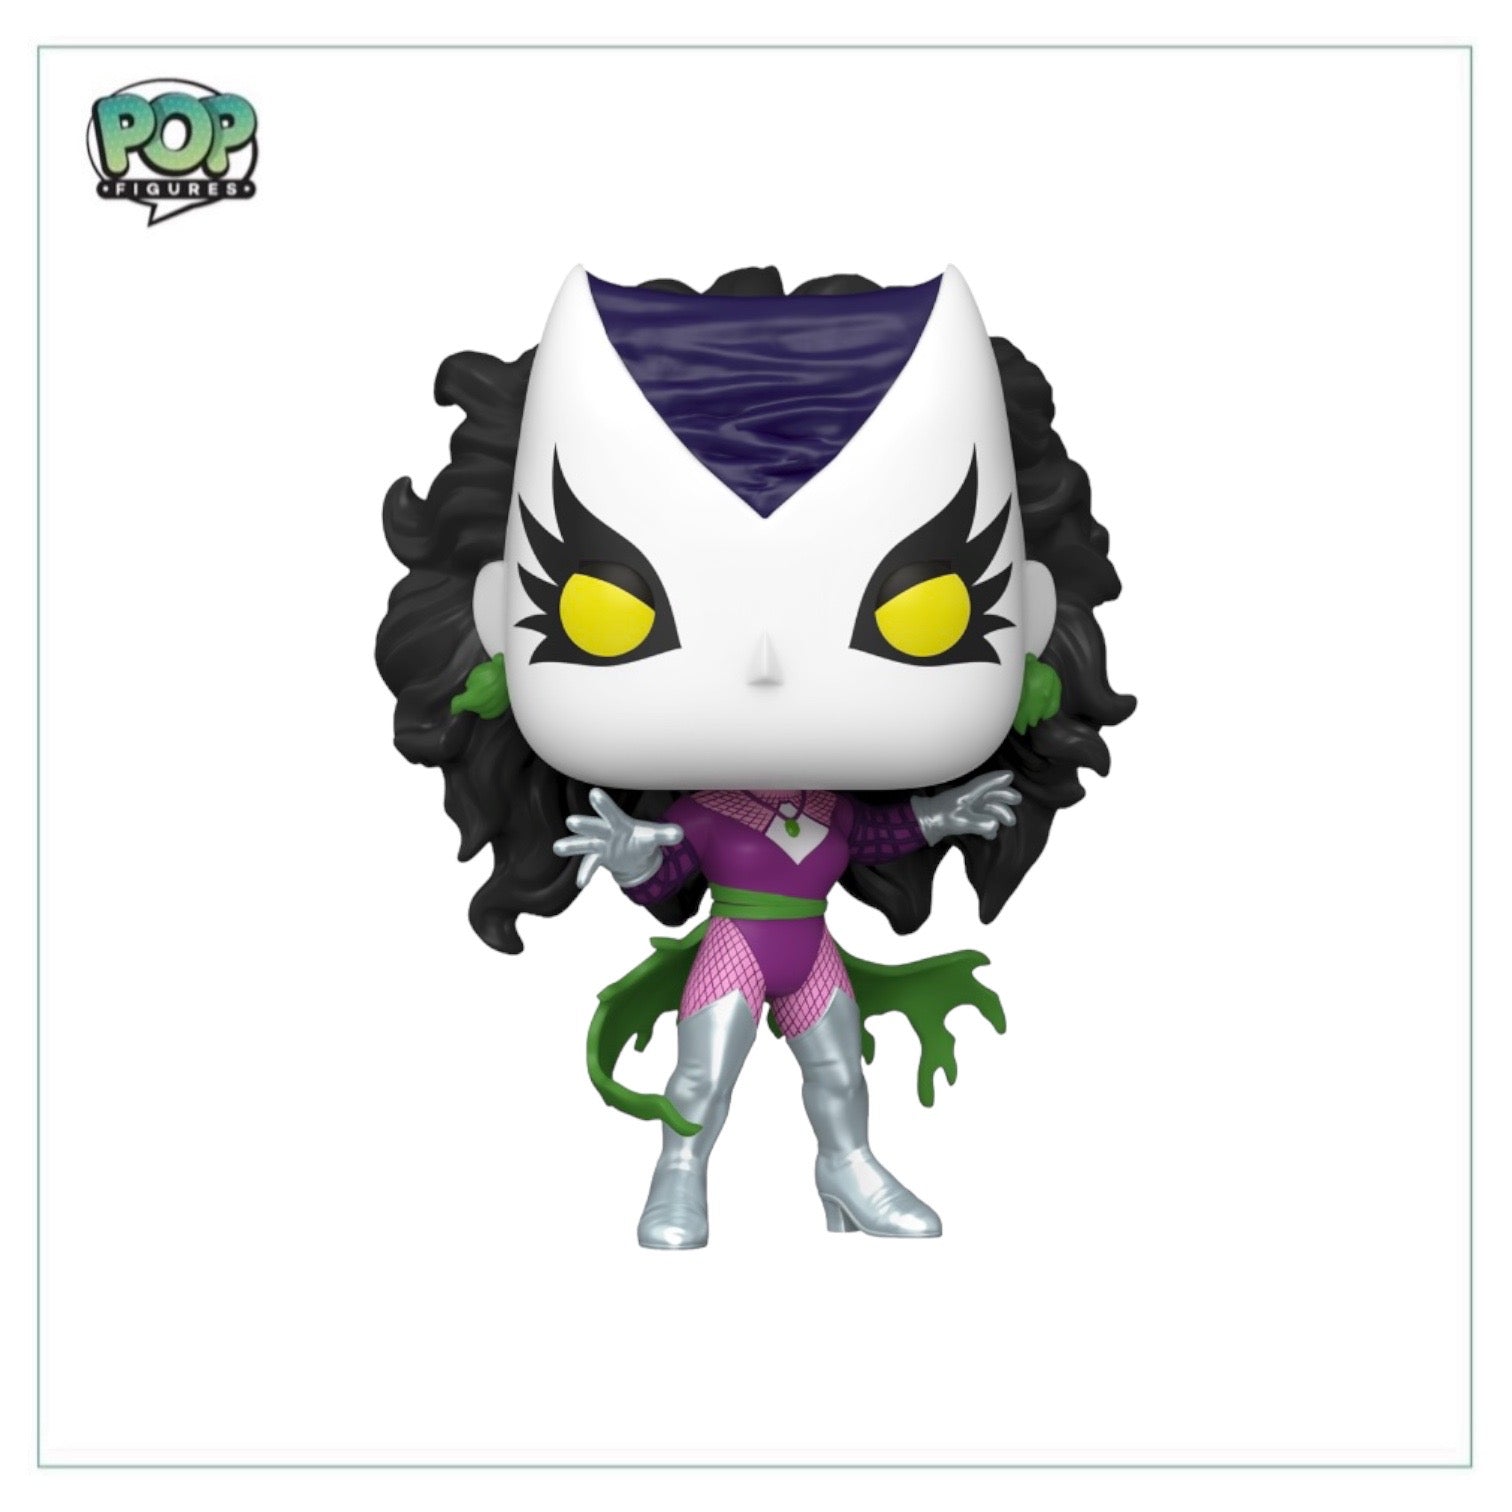 Lilith #1264 Funko Pop! - Marvel - SDCC 2023 Shared Exclusive